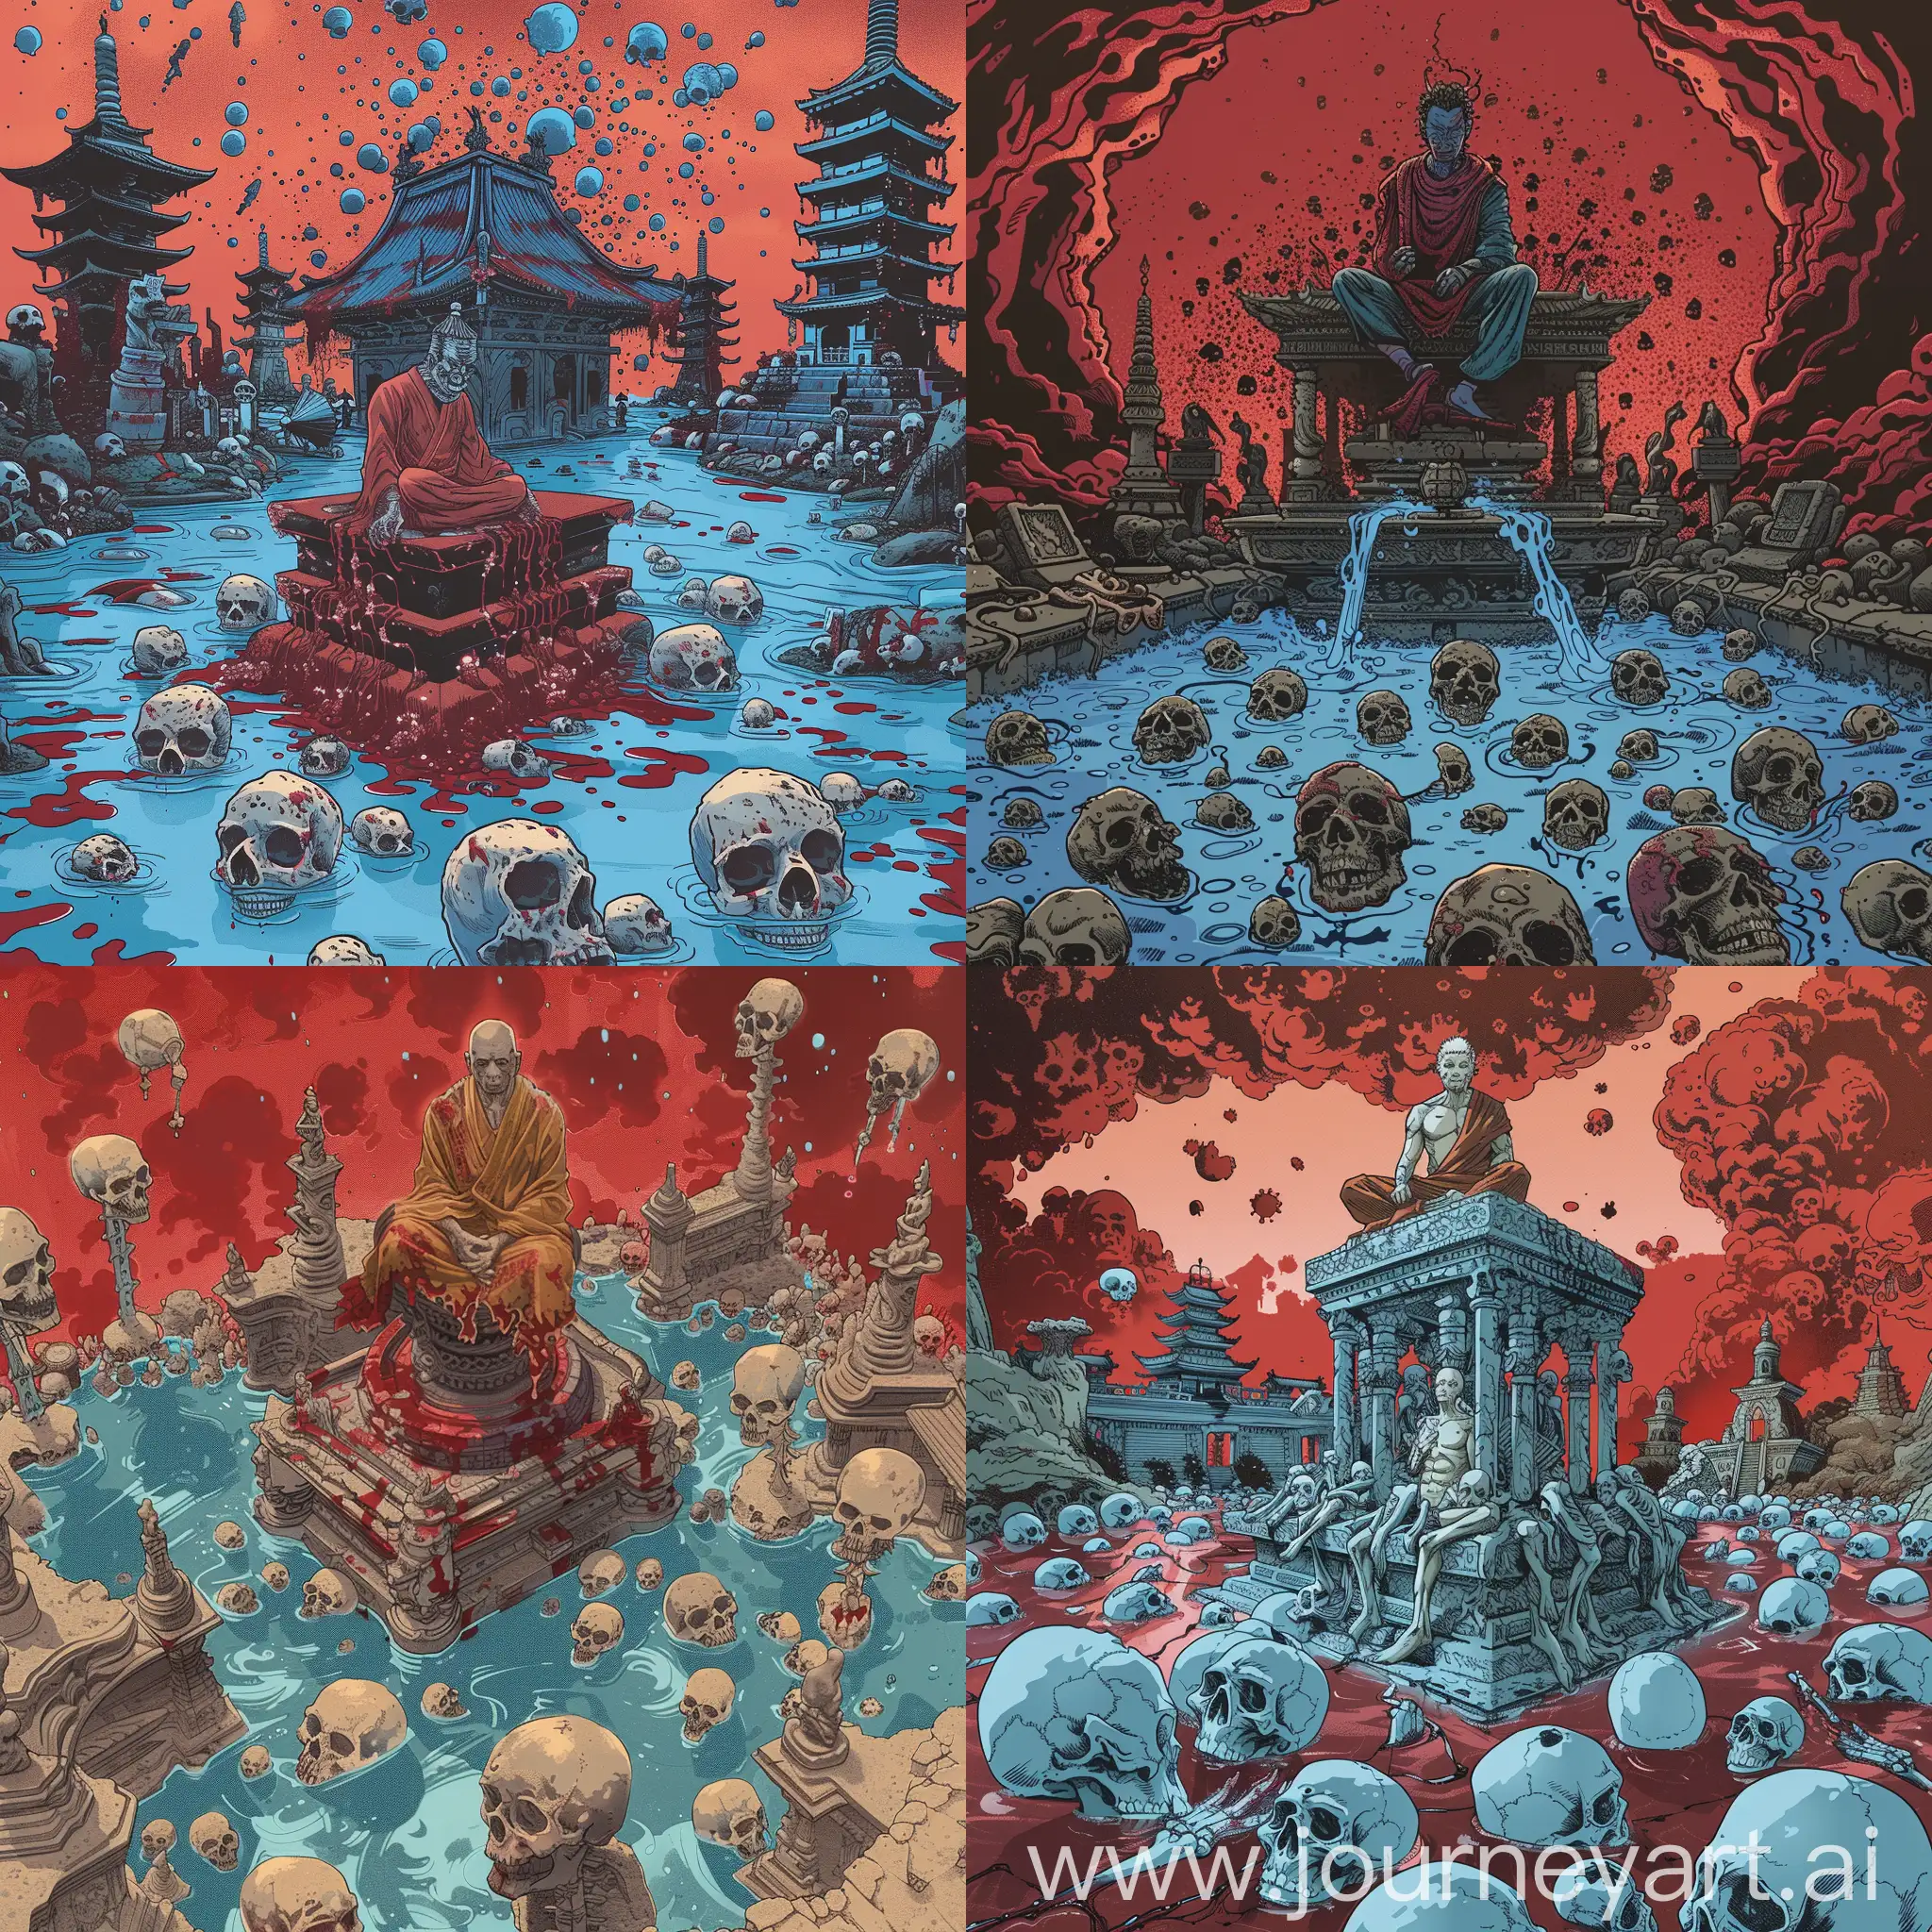 "Generate an image of Sukuna's Domain Expansion from 'Jujutsu Kaisen.' Sukuna sits on a temple amidst illusions. The sky is reddish, symbolizing blood, with temple illusions. The ground has blueish illusions of skulls and water. Sukuna is in a king-like pose on a temple covered in skeletons and skulls. The focus is on Sukuna's Domain Expansion, full of illusions and horror elements."